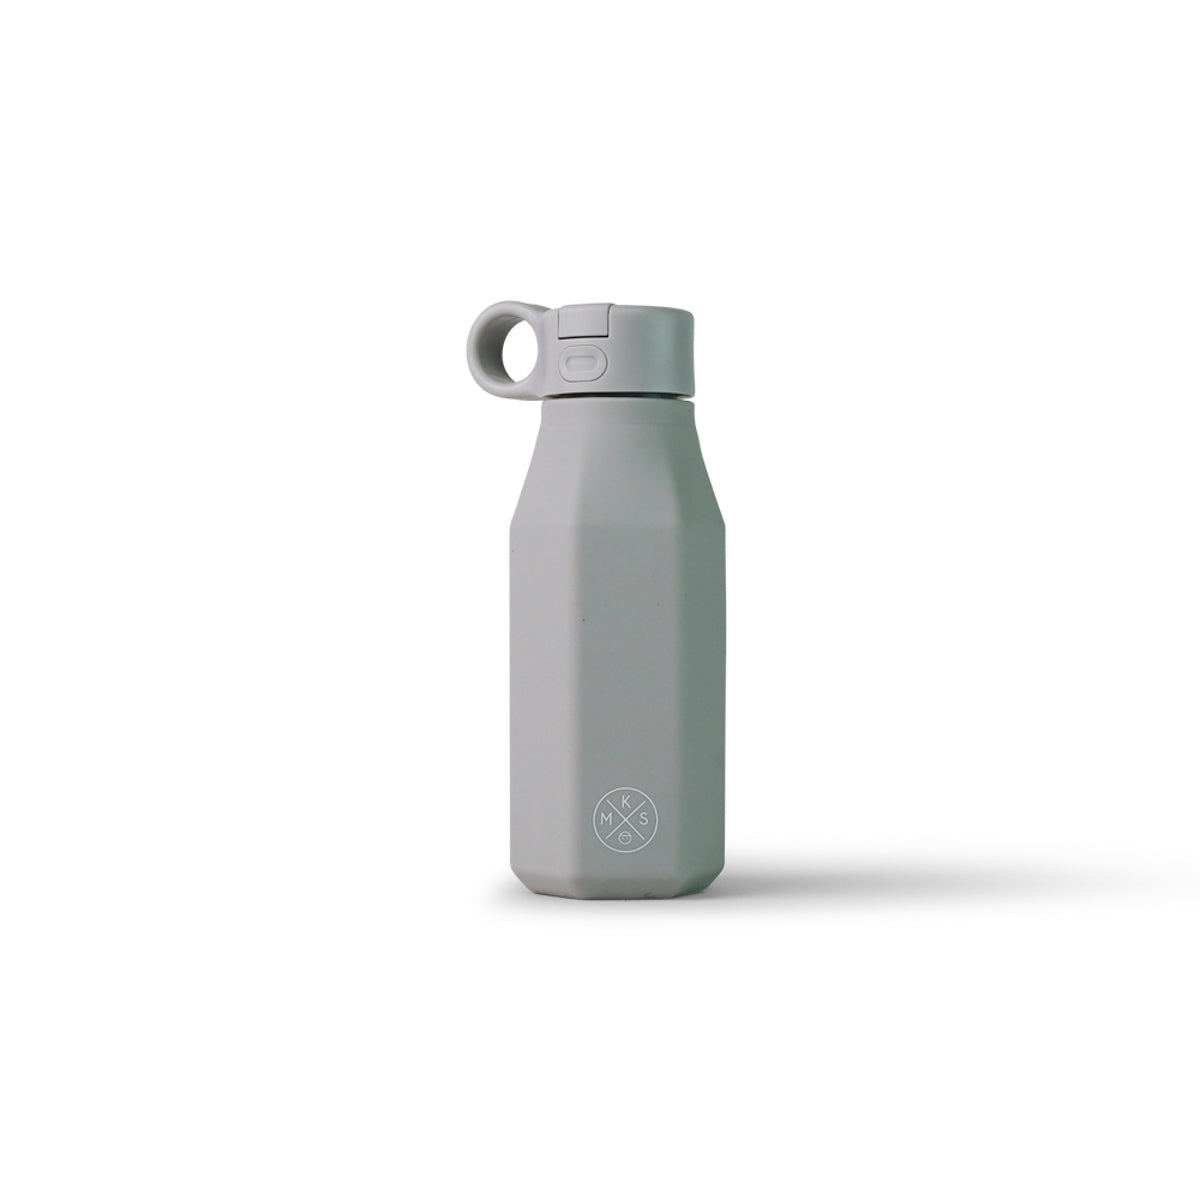 Durable, easy to clean, durable, a perfect on-the-go water bottle in soft matte food grade silicone BPA free with straw lid and handle on the top. Must have at school, while traveling or simply at home. For kids and adults. MKS Miminoo Arizona USA Brand. 13 colors. Wholesale Faire. Light grey for boys and girls. 